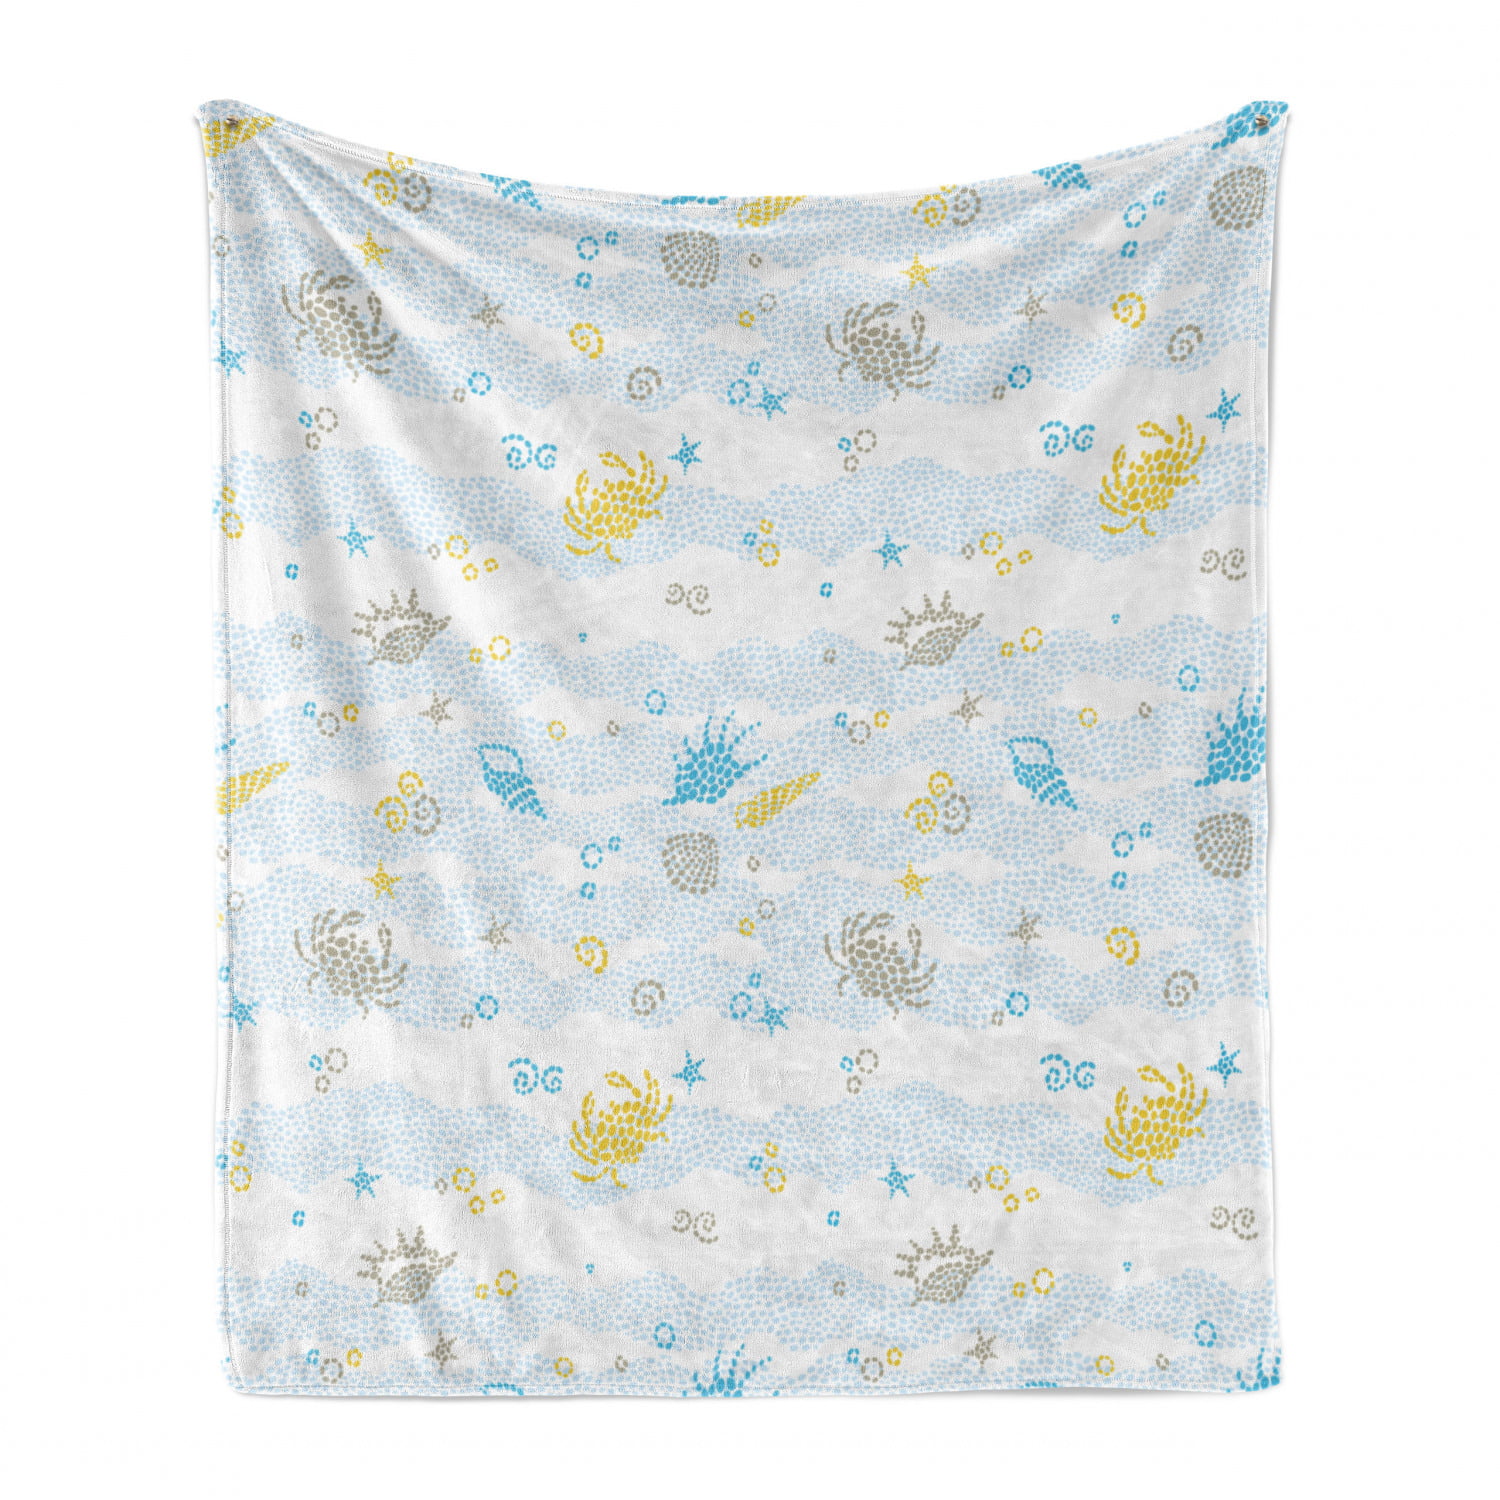 Maritime Sea Theme Crabs and Seashells Animals on The Spotted Background Print Cozy Plush for Indoor and Outdoor Use 50 x 60 Blue and Yellow Ambesonne Crabs Soft Flannel Fleece Throw Blanket 